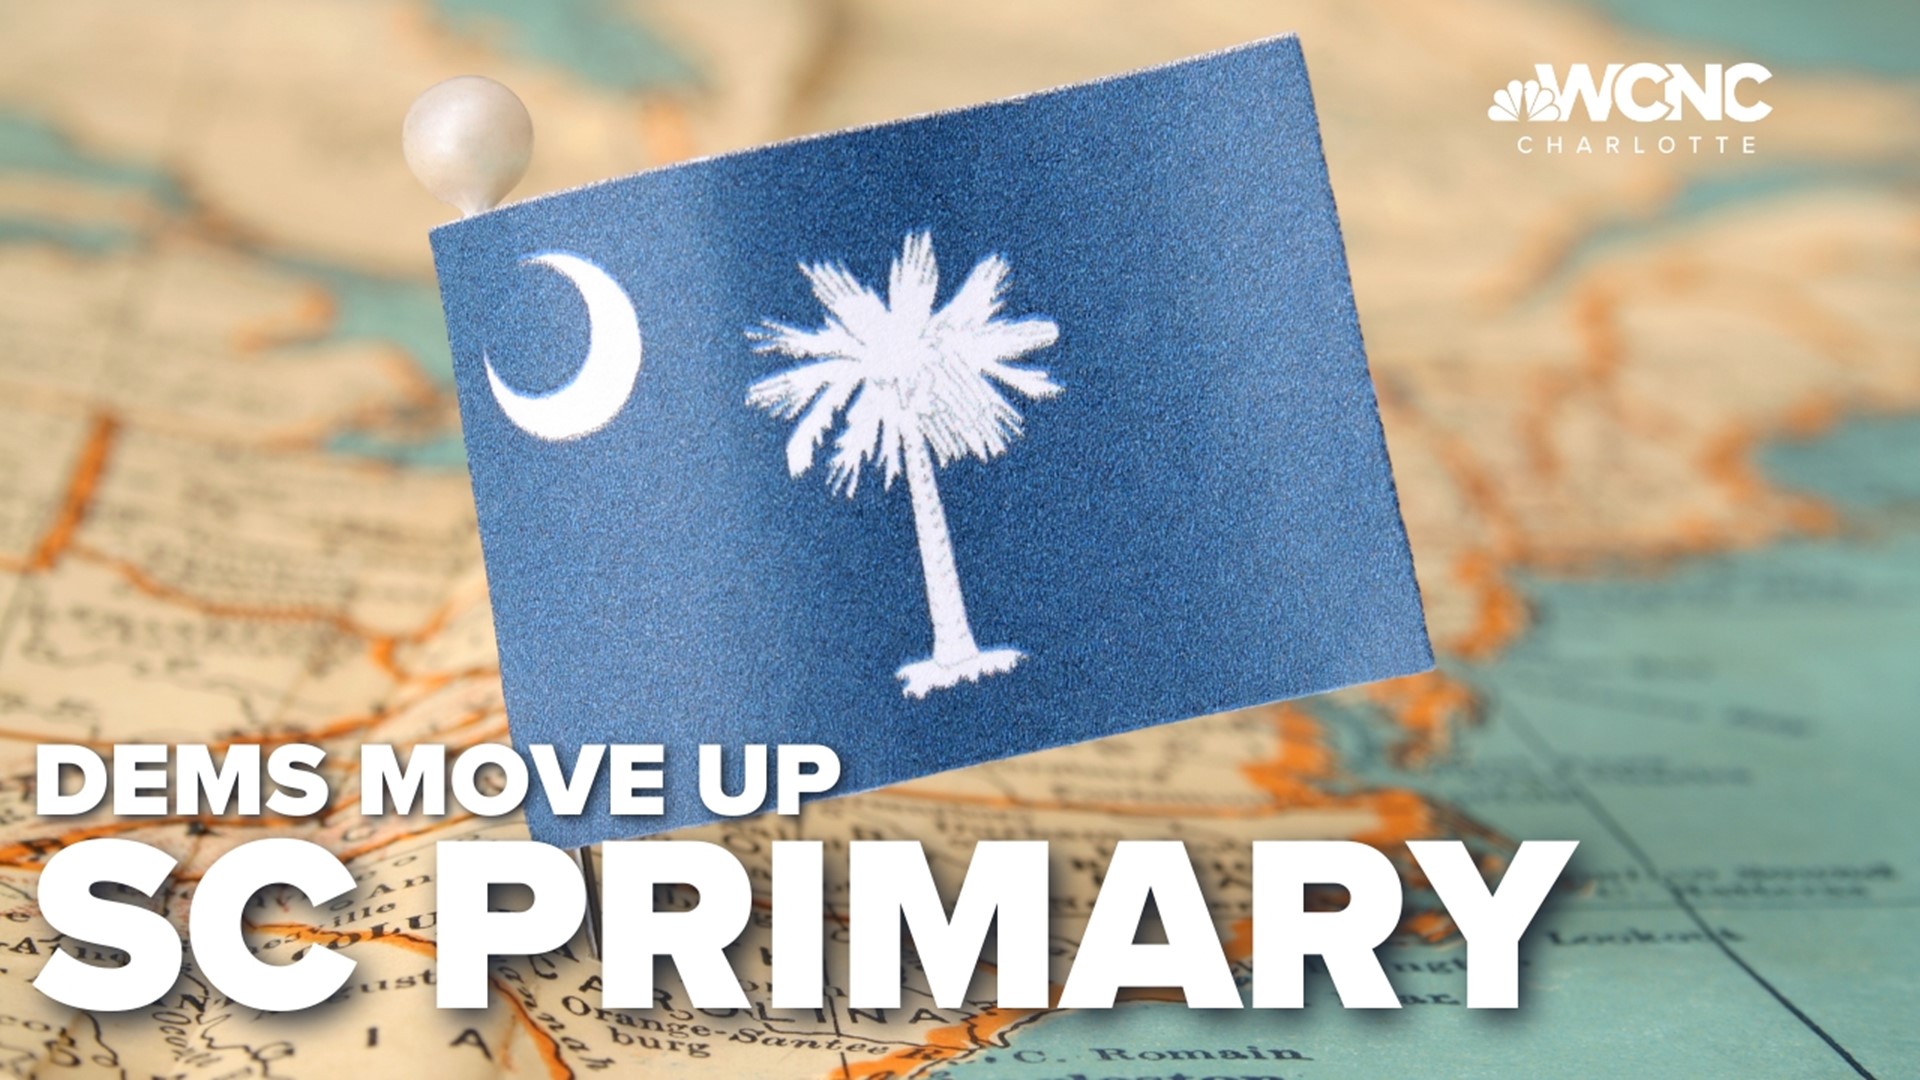 Democrats have voted to make South Carolina the first presidential primary, but it's not set in stone yet.